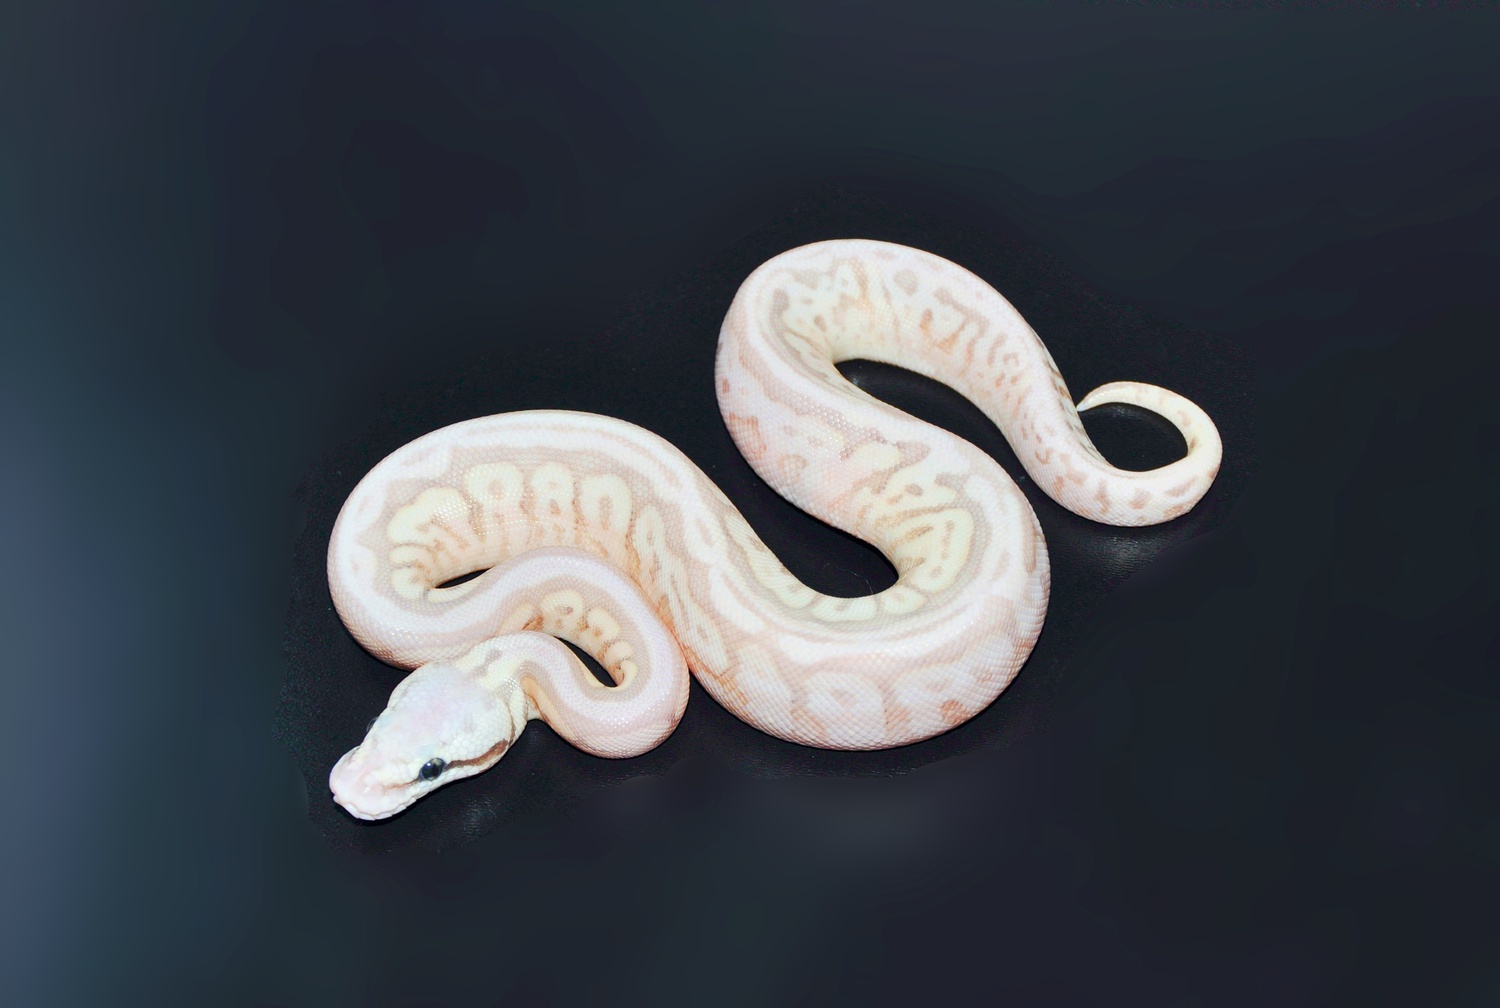 Killer Queen Bee Enchi Yellow Belly Leopard Ghost Ball Python by Marki Reptiles